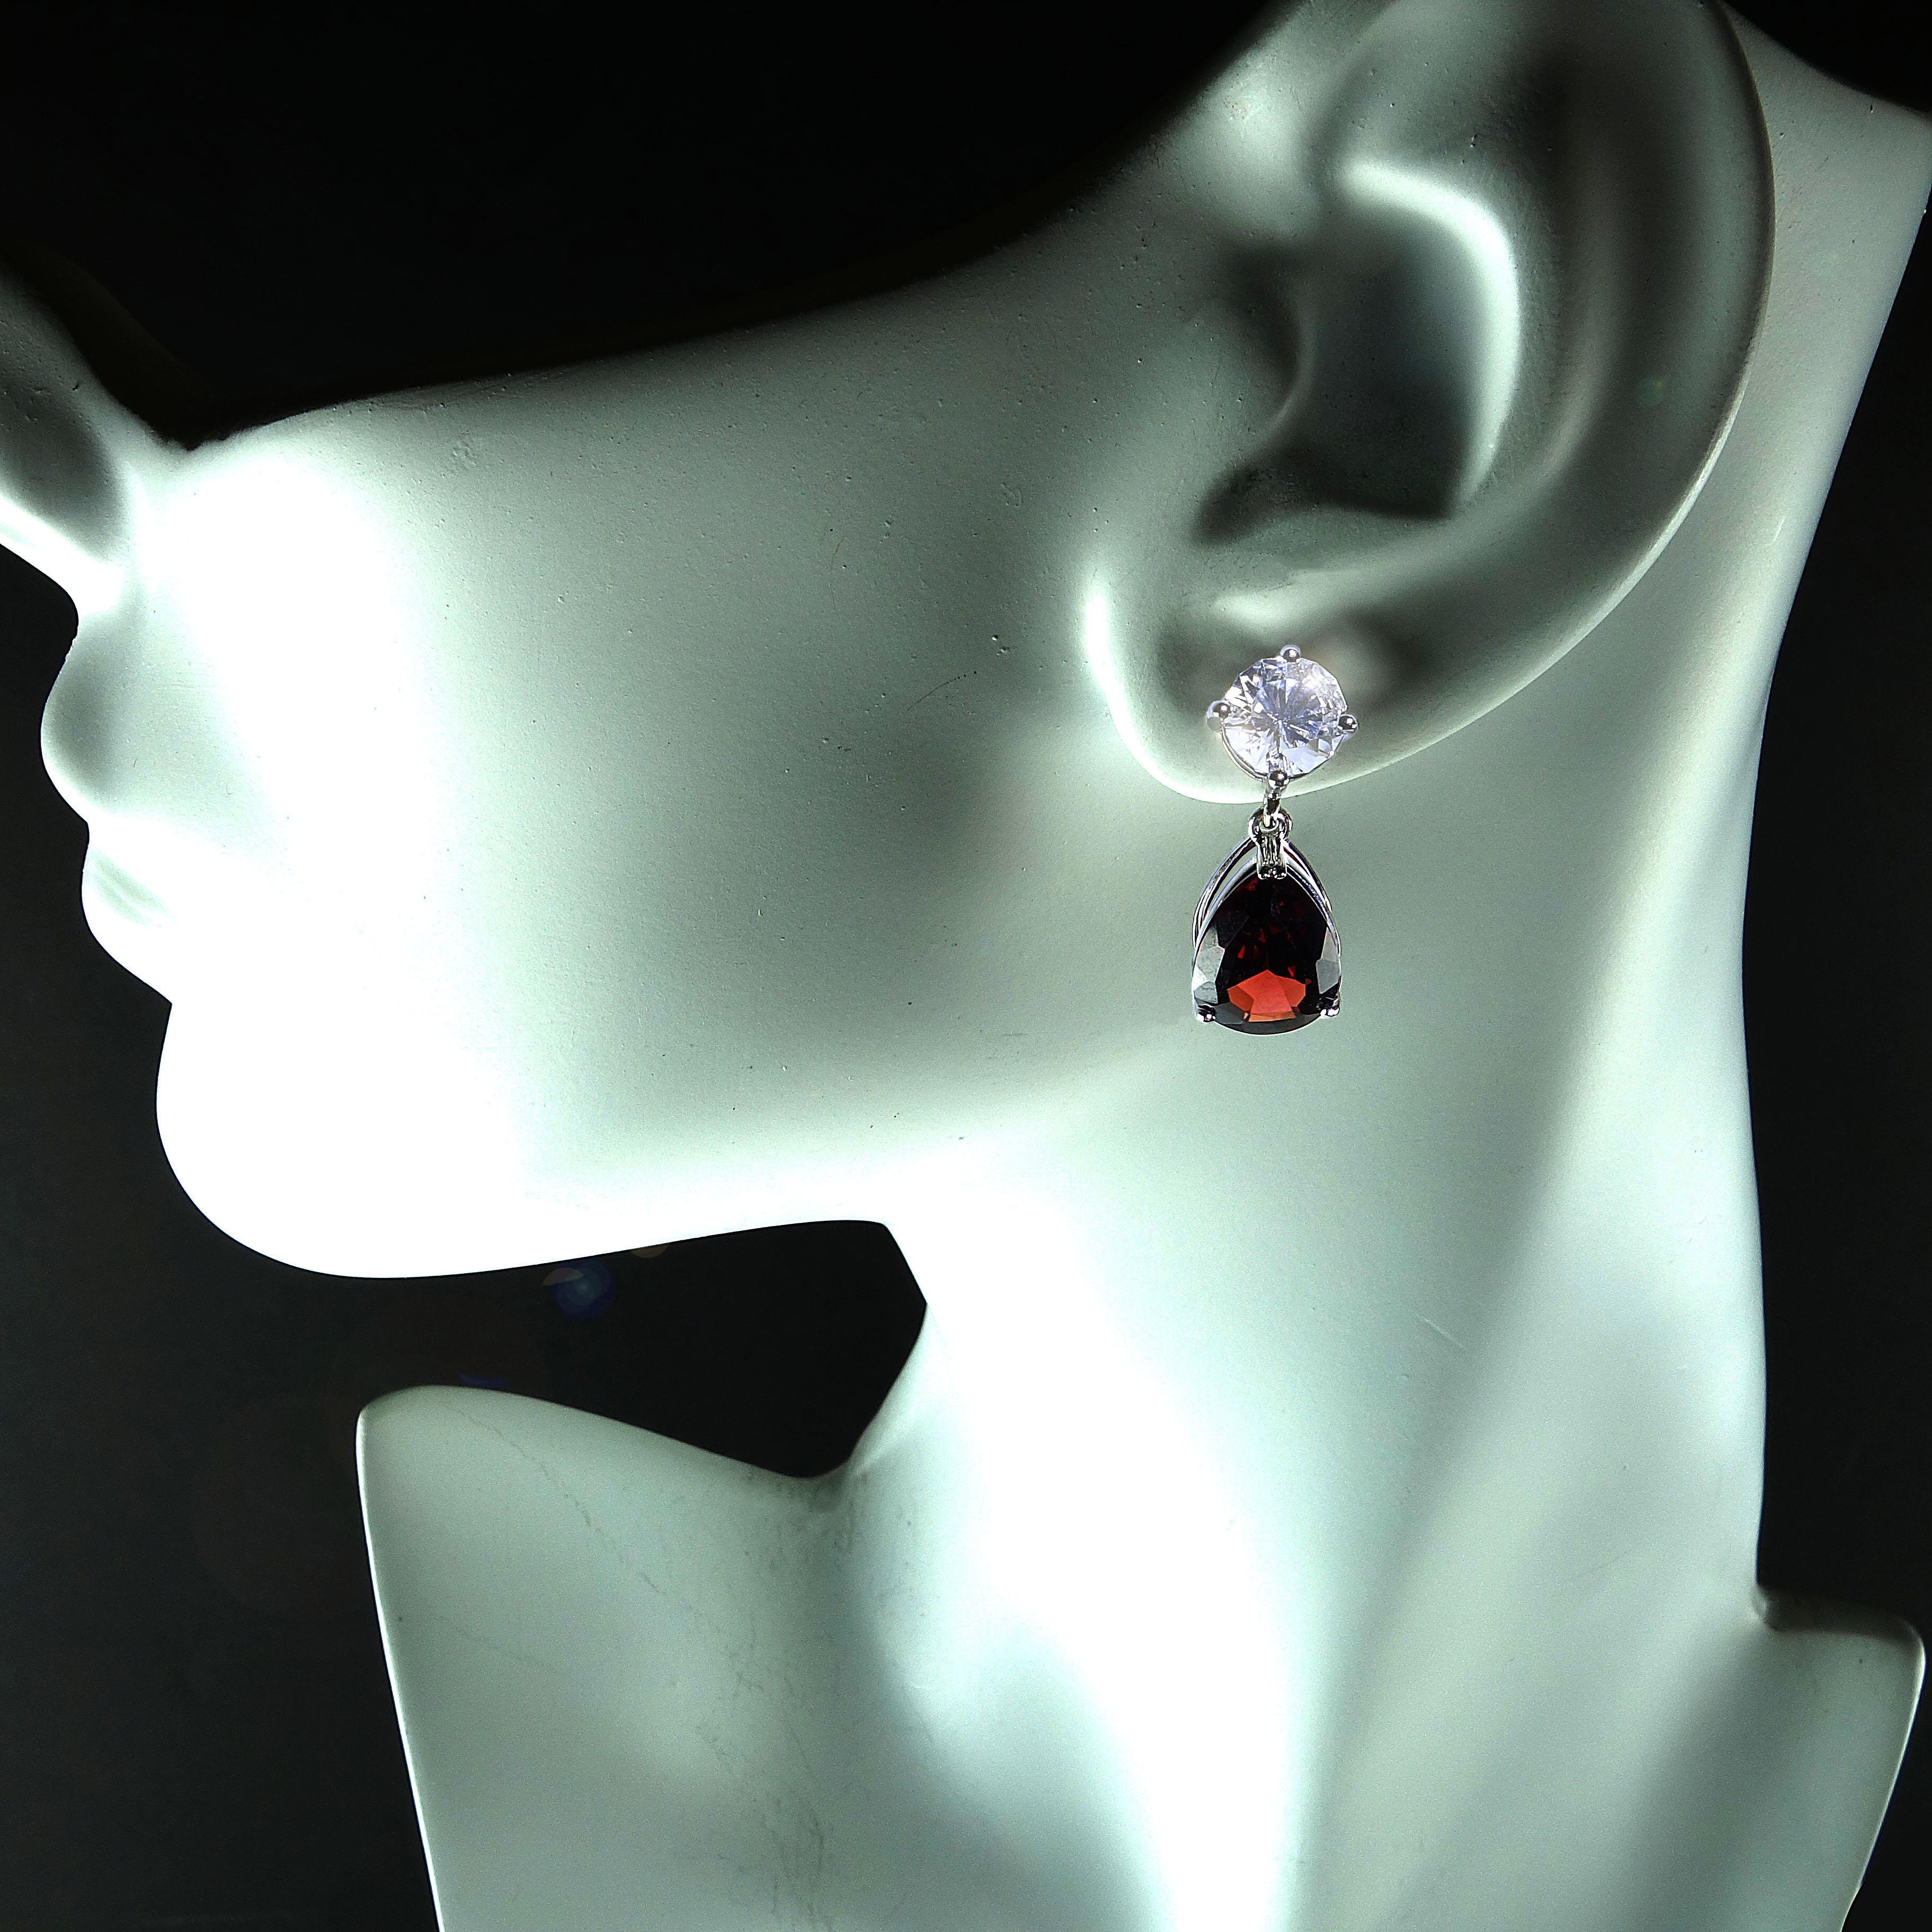 Handmade, sparkling White Danburite Studs with dangling red Garnets Earrings. Glorious Garnets swinging from these flashing Danburites are an unbeatable combination! This stunning pair of garnets were secured from one of our favorite suppliers up in